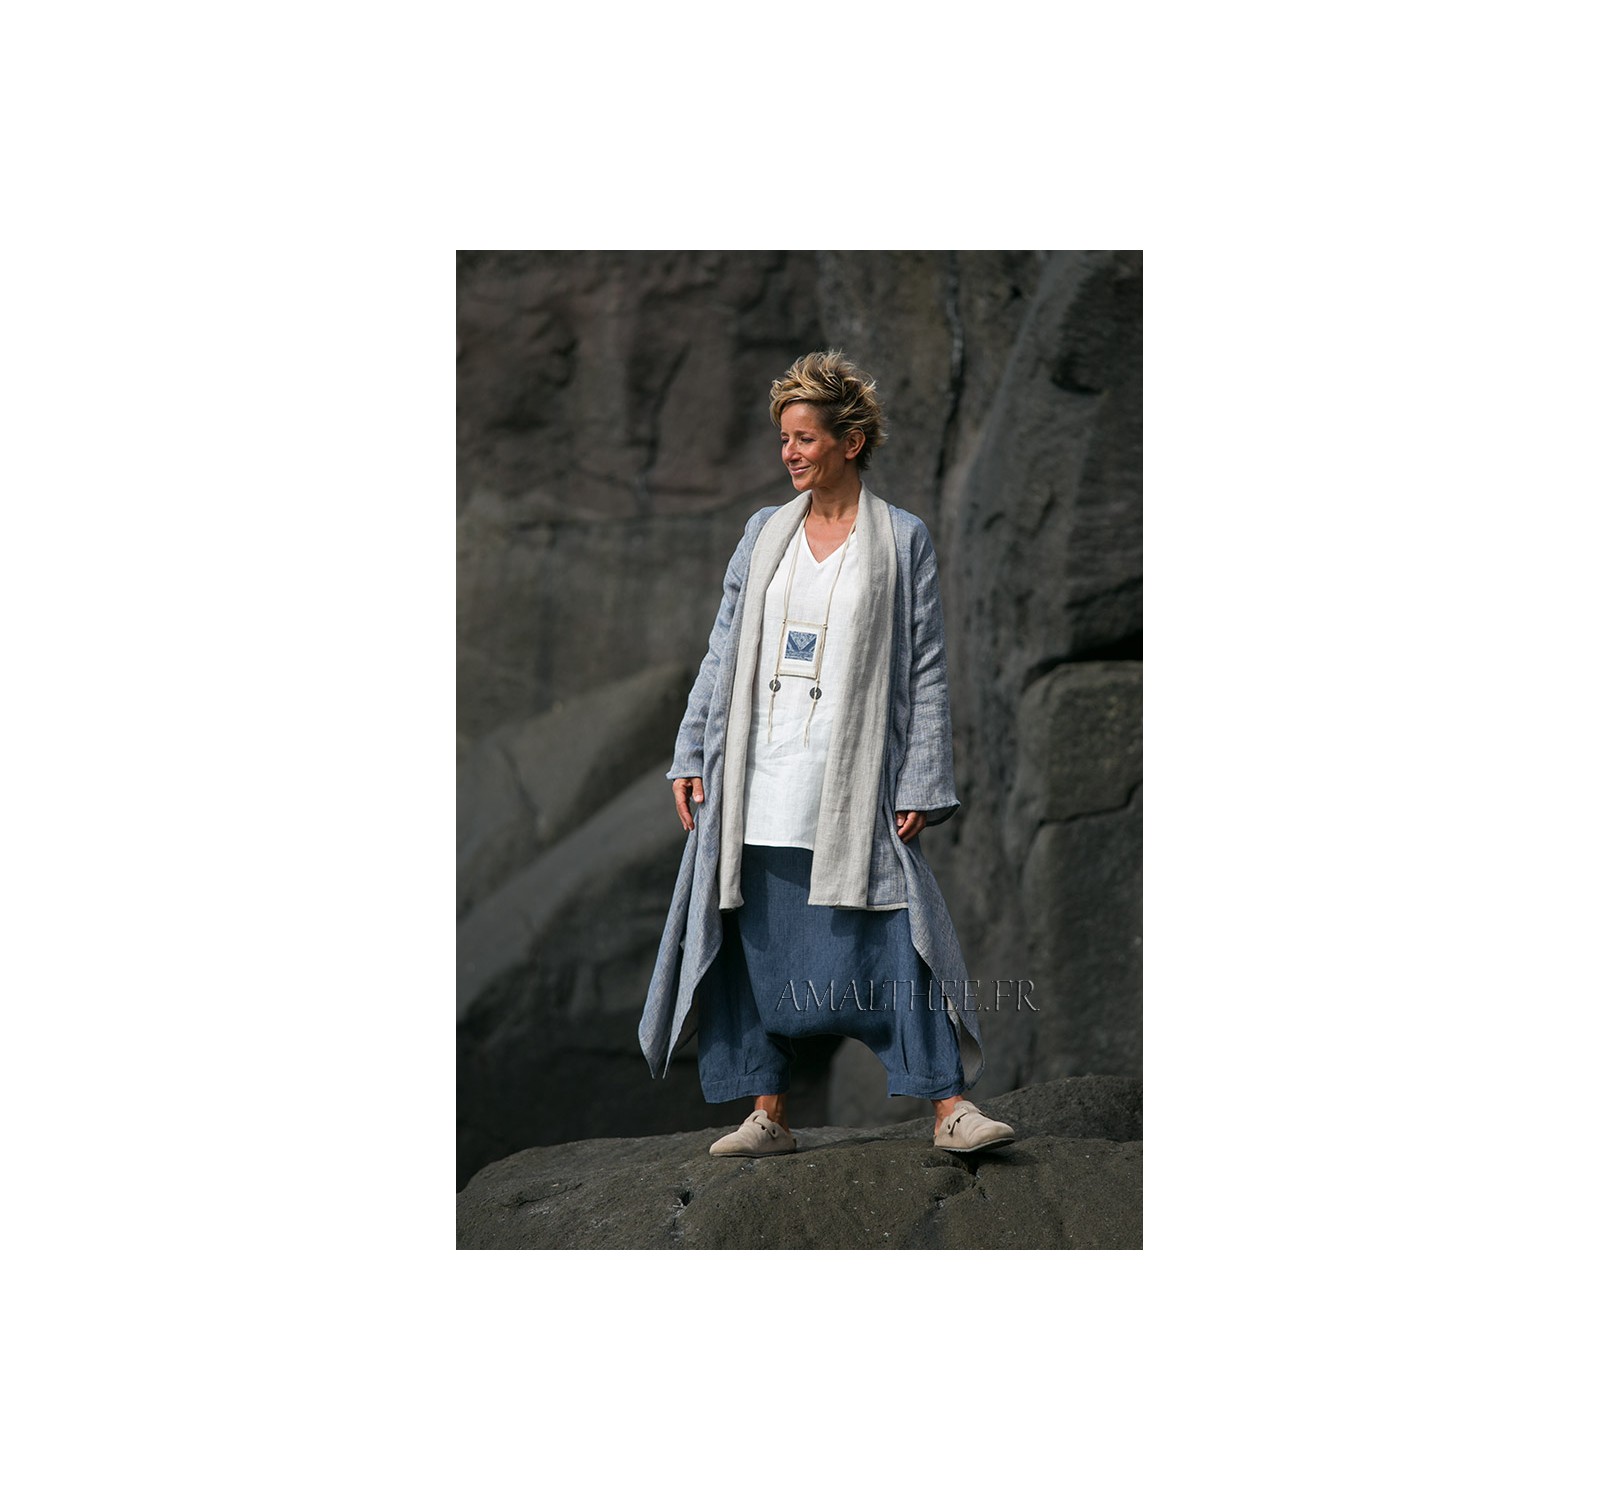 Spring-summer season Blue linen  coat 2 layers woven together oatmeal and blue